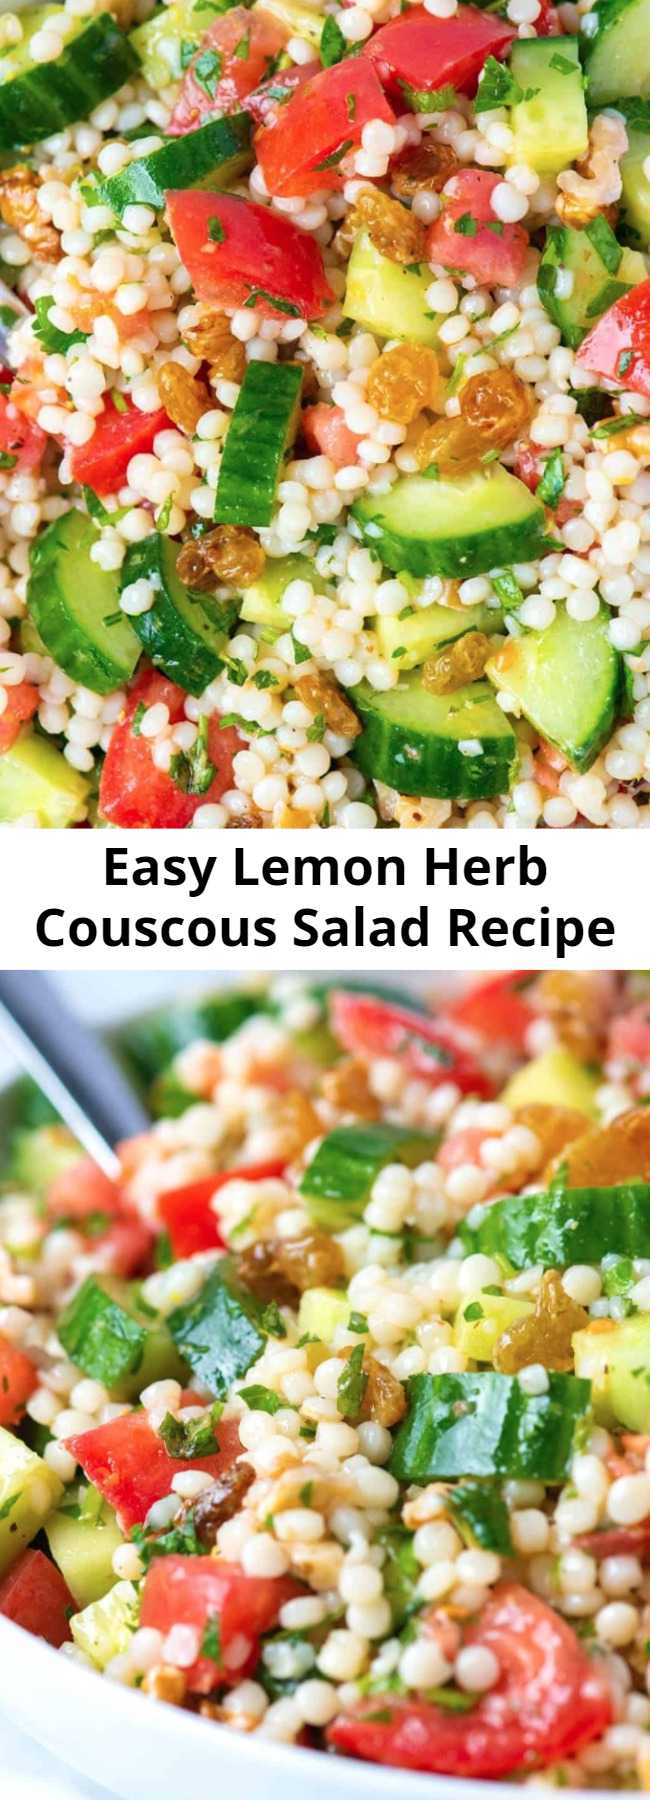 Easy Lemon Herb Couscous Salad Recipe - We love this light couscous salad — it doubles as a side, can be the main event or works well topped with grilled chicken or Adam’s favorite, shrimp! With lots of texture from crisp cucumber, sweet tomatoes, crunchy nuts and raisins, this is certainly one of our favorites. You can even make it ahead of time.